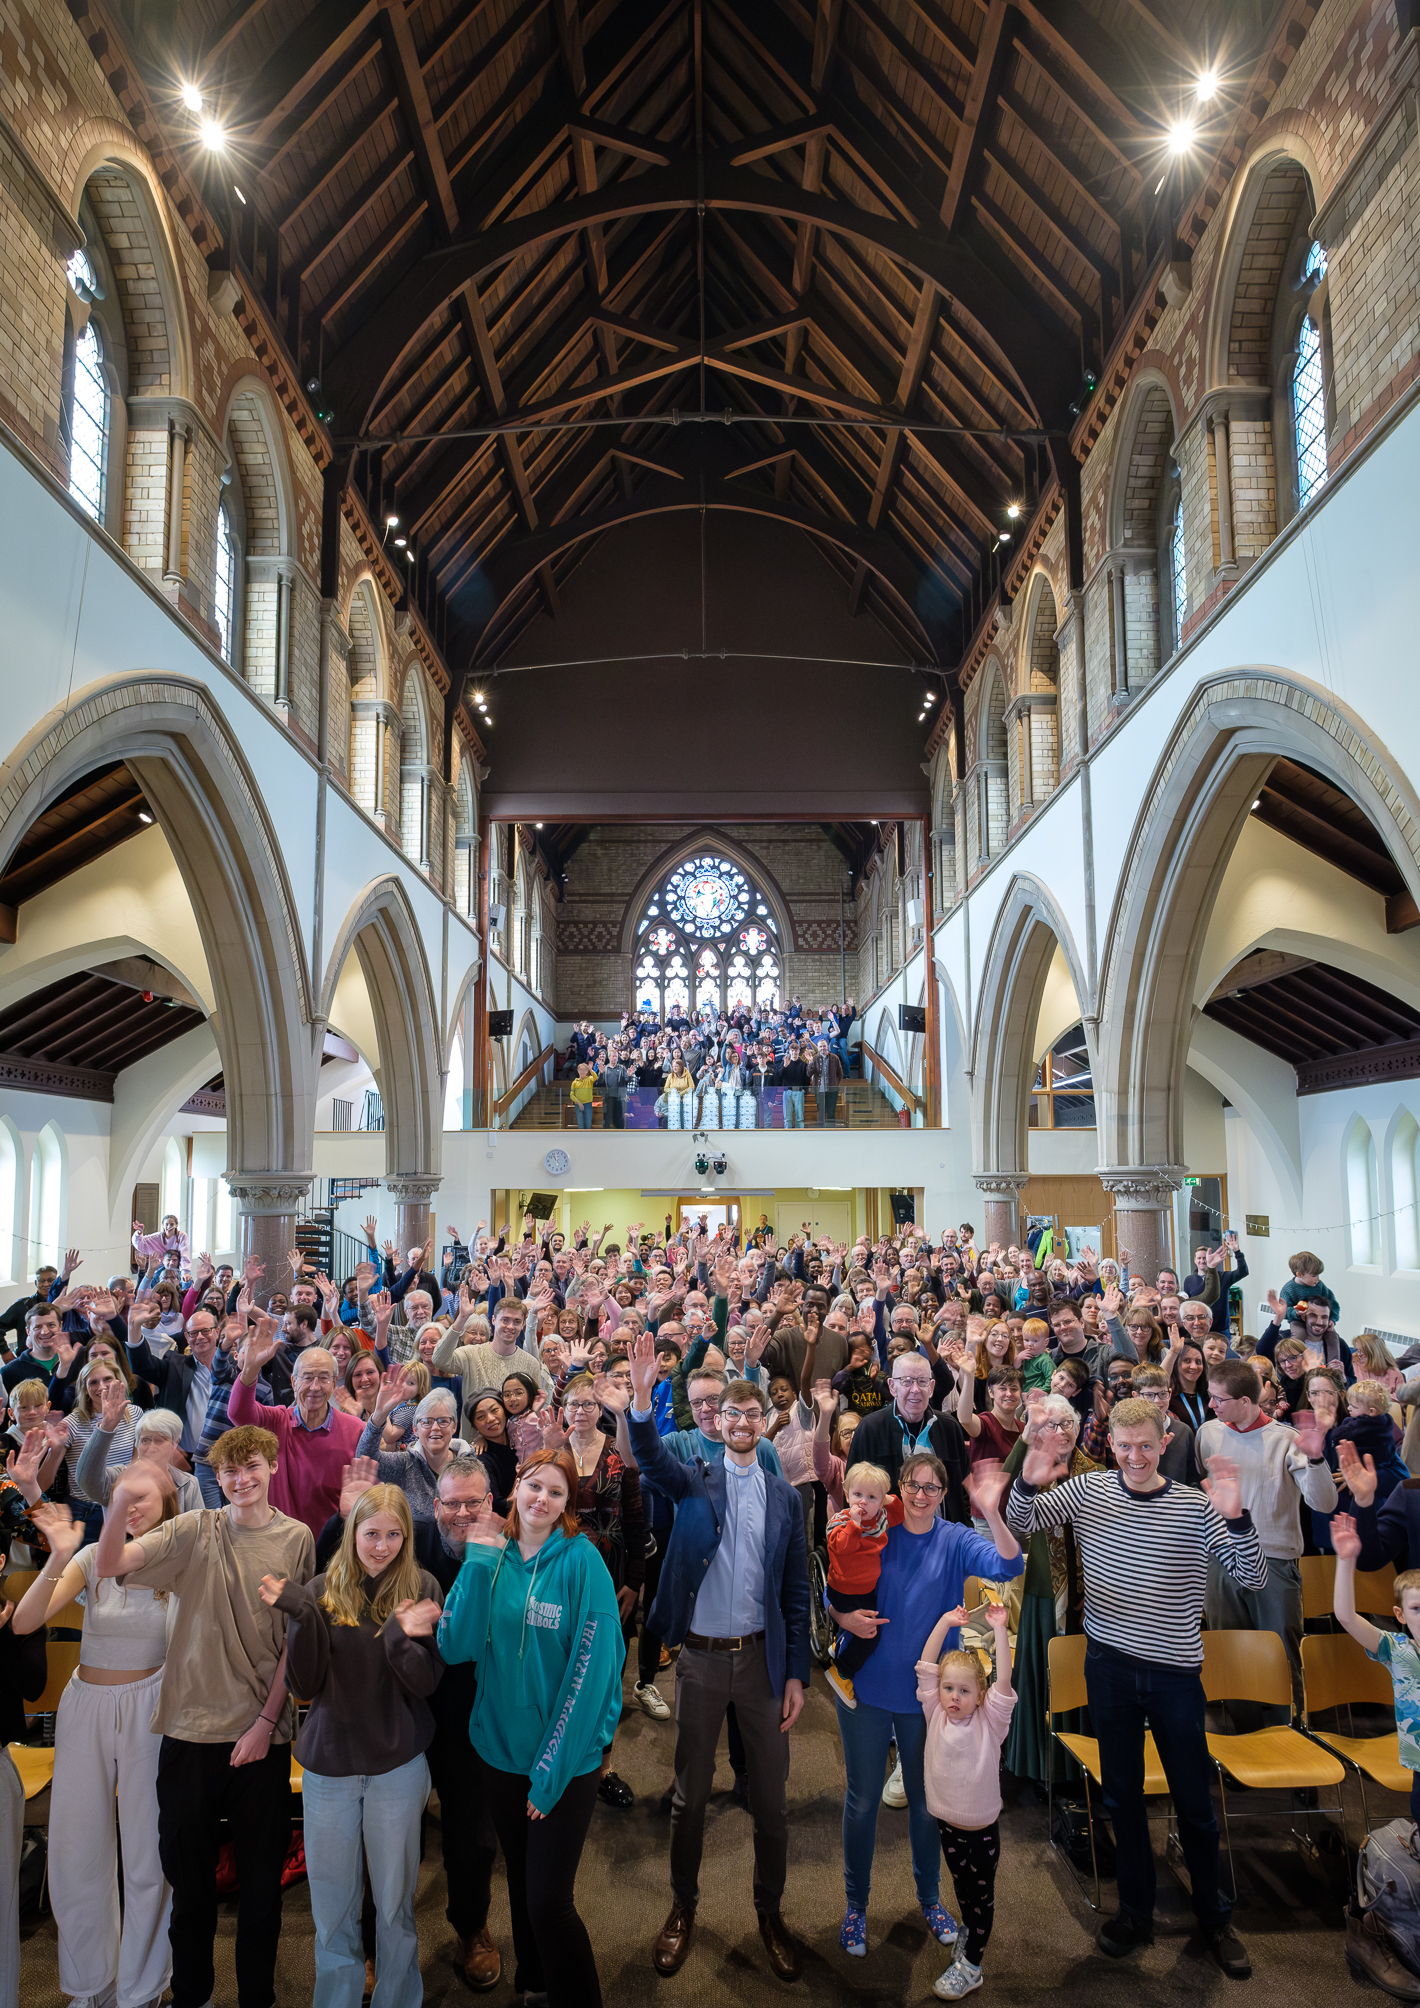 St Paul's congregation standing and waving